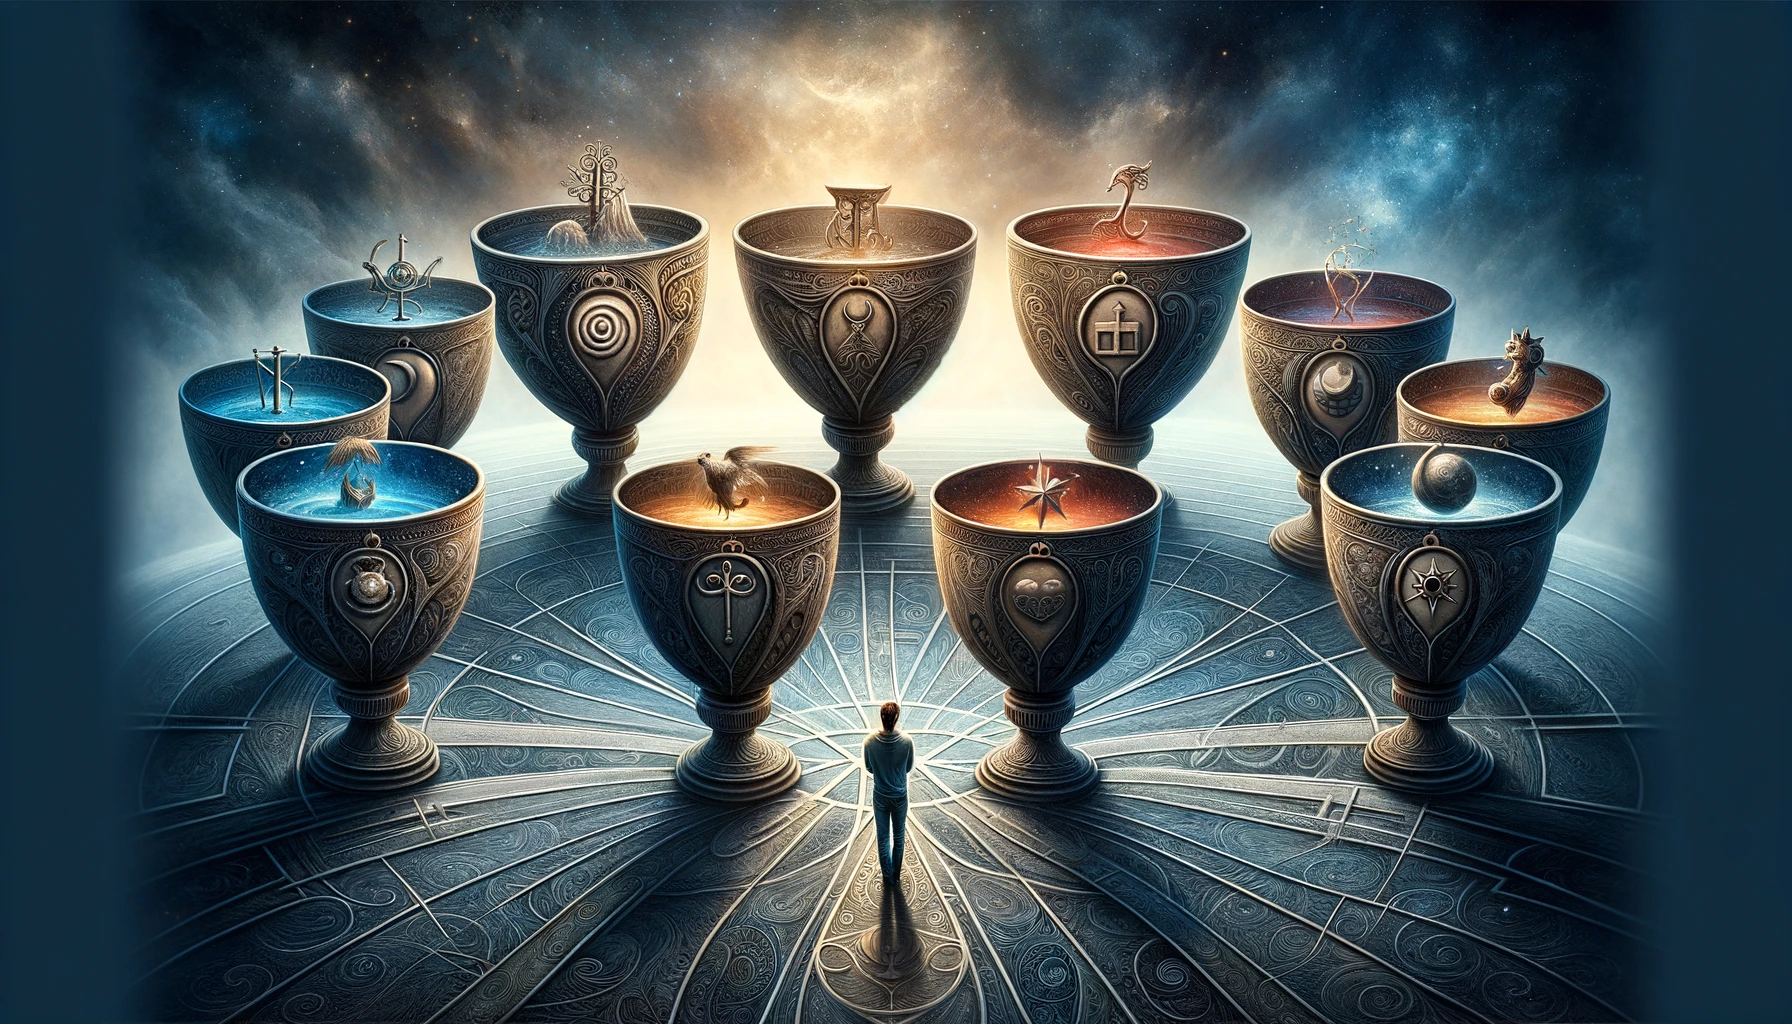 An image showcasing a person standing at a crossroads surrounded by seven ornate cups each holding a different dream or desire. The cups are display